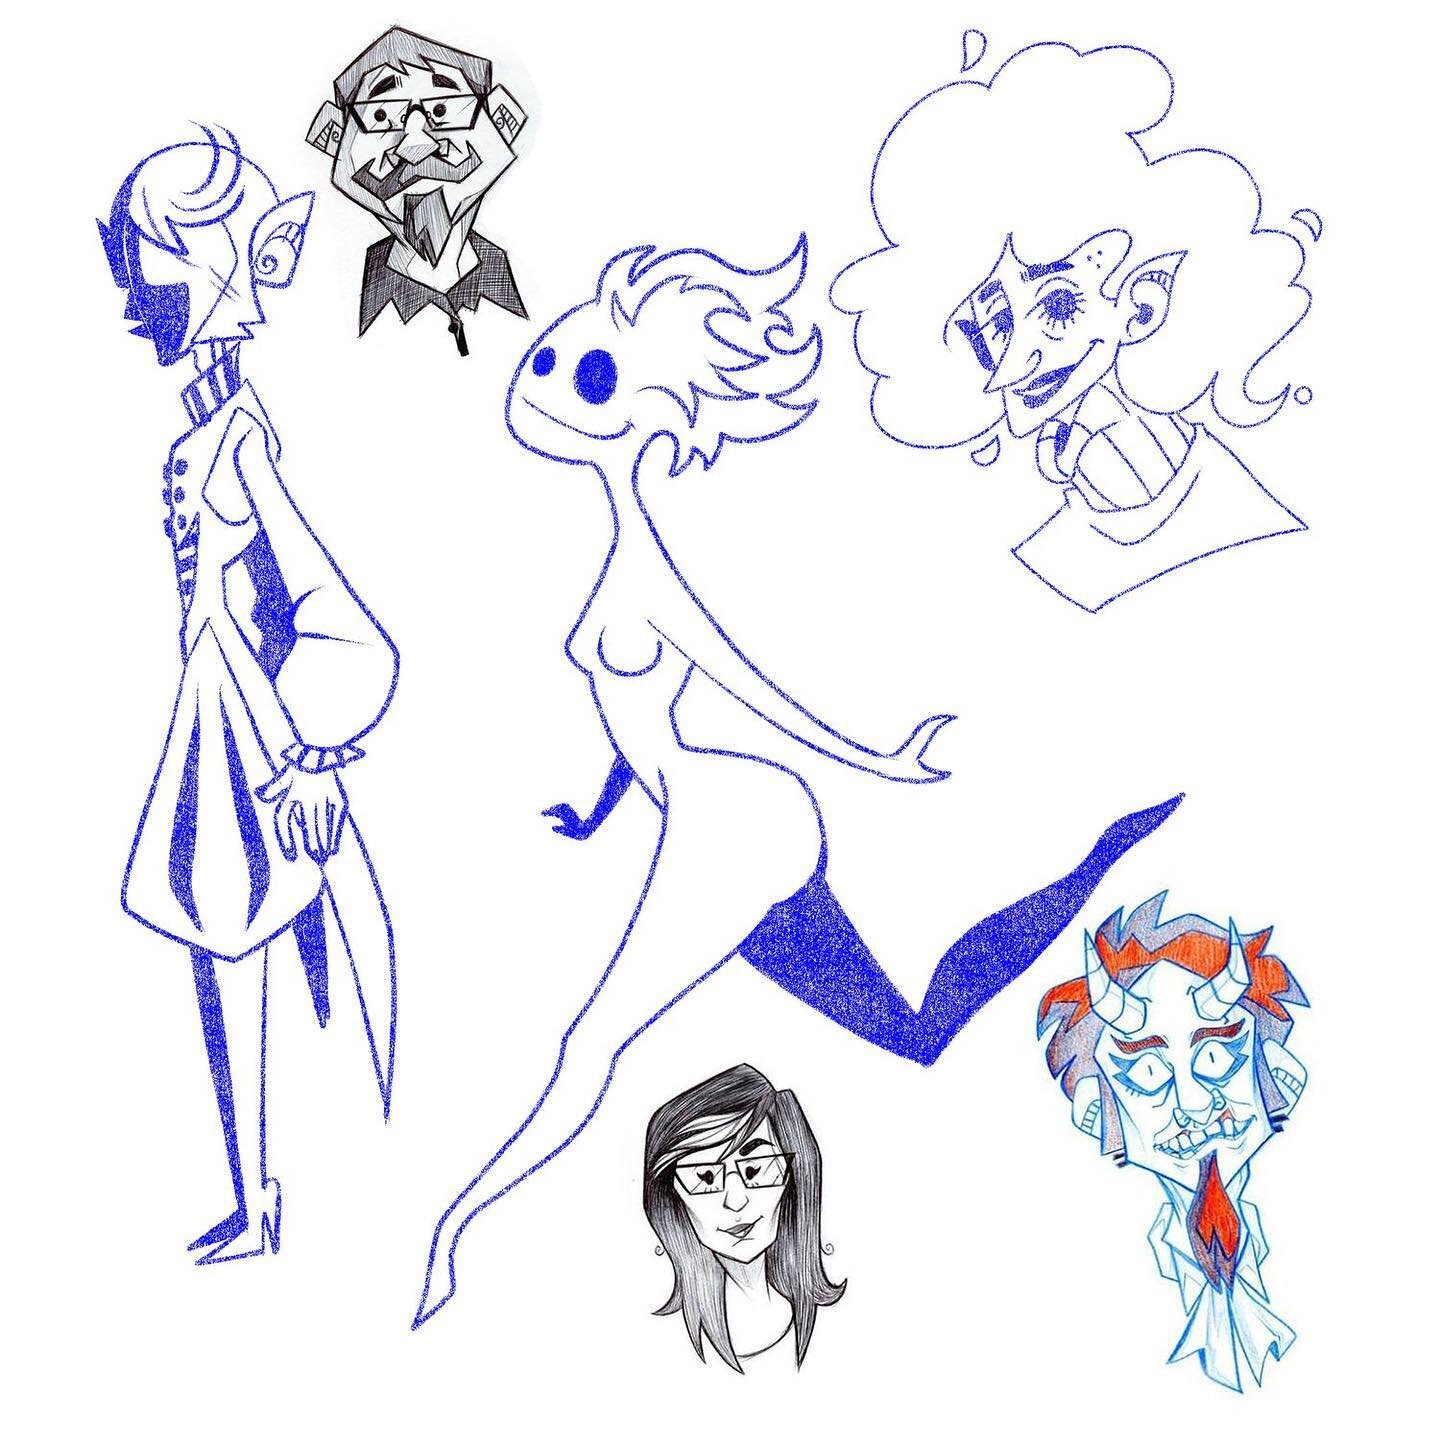 Just some random sketches. The Pied Piper from my own story. He&rsquo;s faceless but can change up his image so no one knows what he really looks like. Then the lady up at the top right is a Beatnik. She&rsquo;s made of cigarette ash. #dannyelfman #o